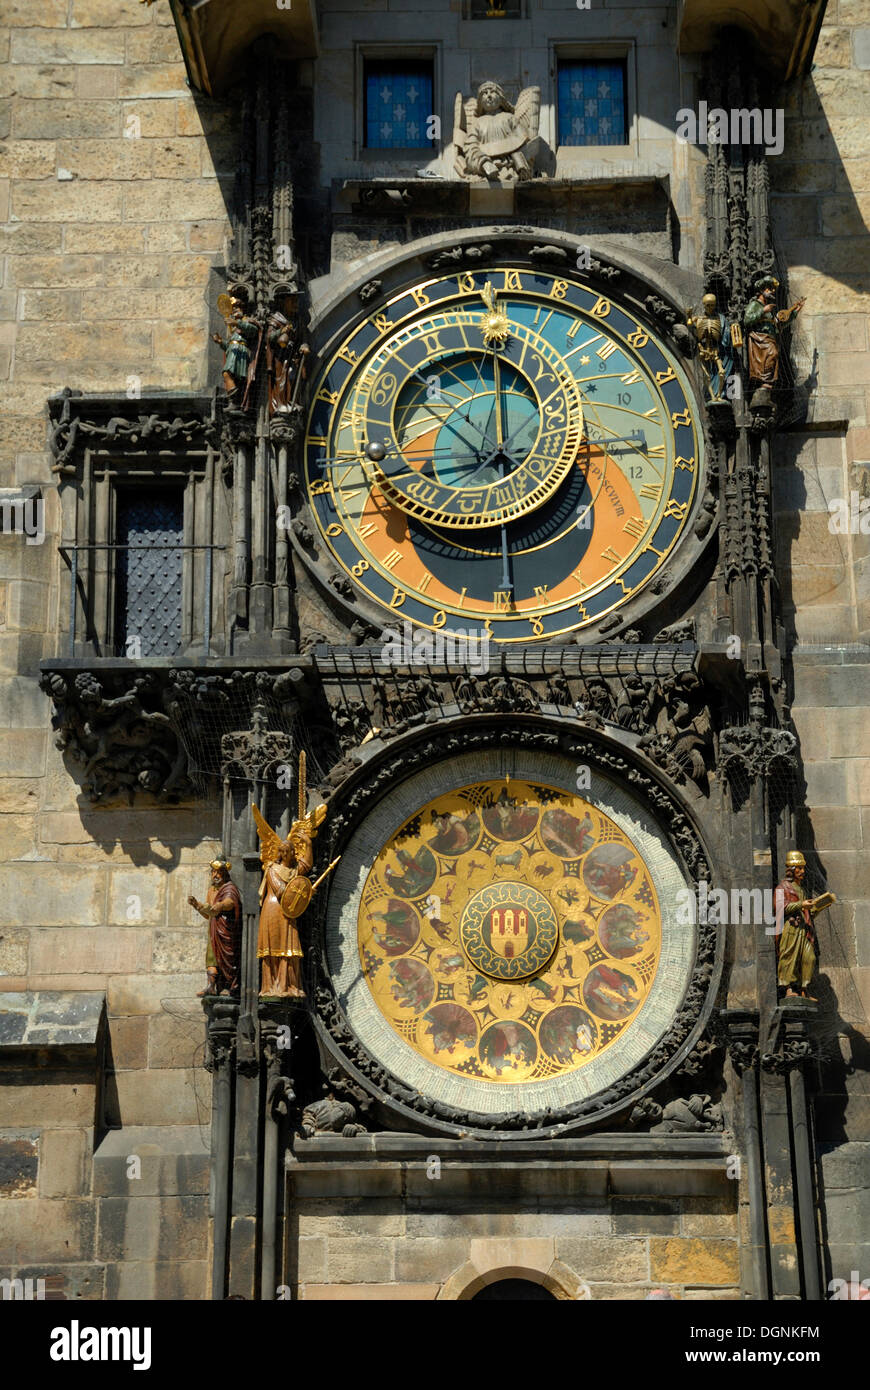 Astronomical clock on the Old Town Hall, Prague, Czech Republic, Europe Stock Photo